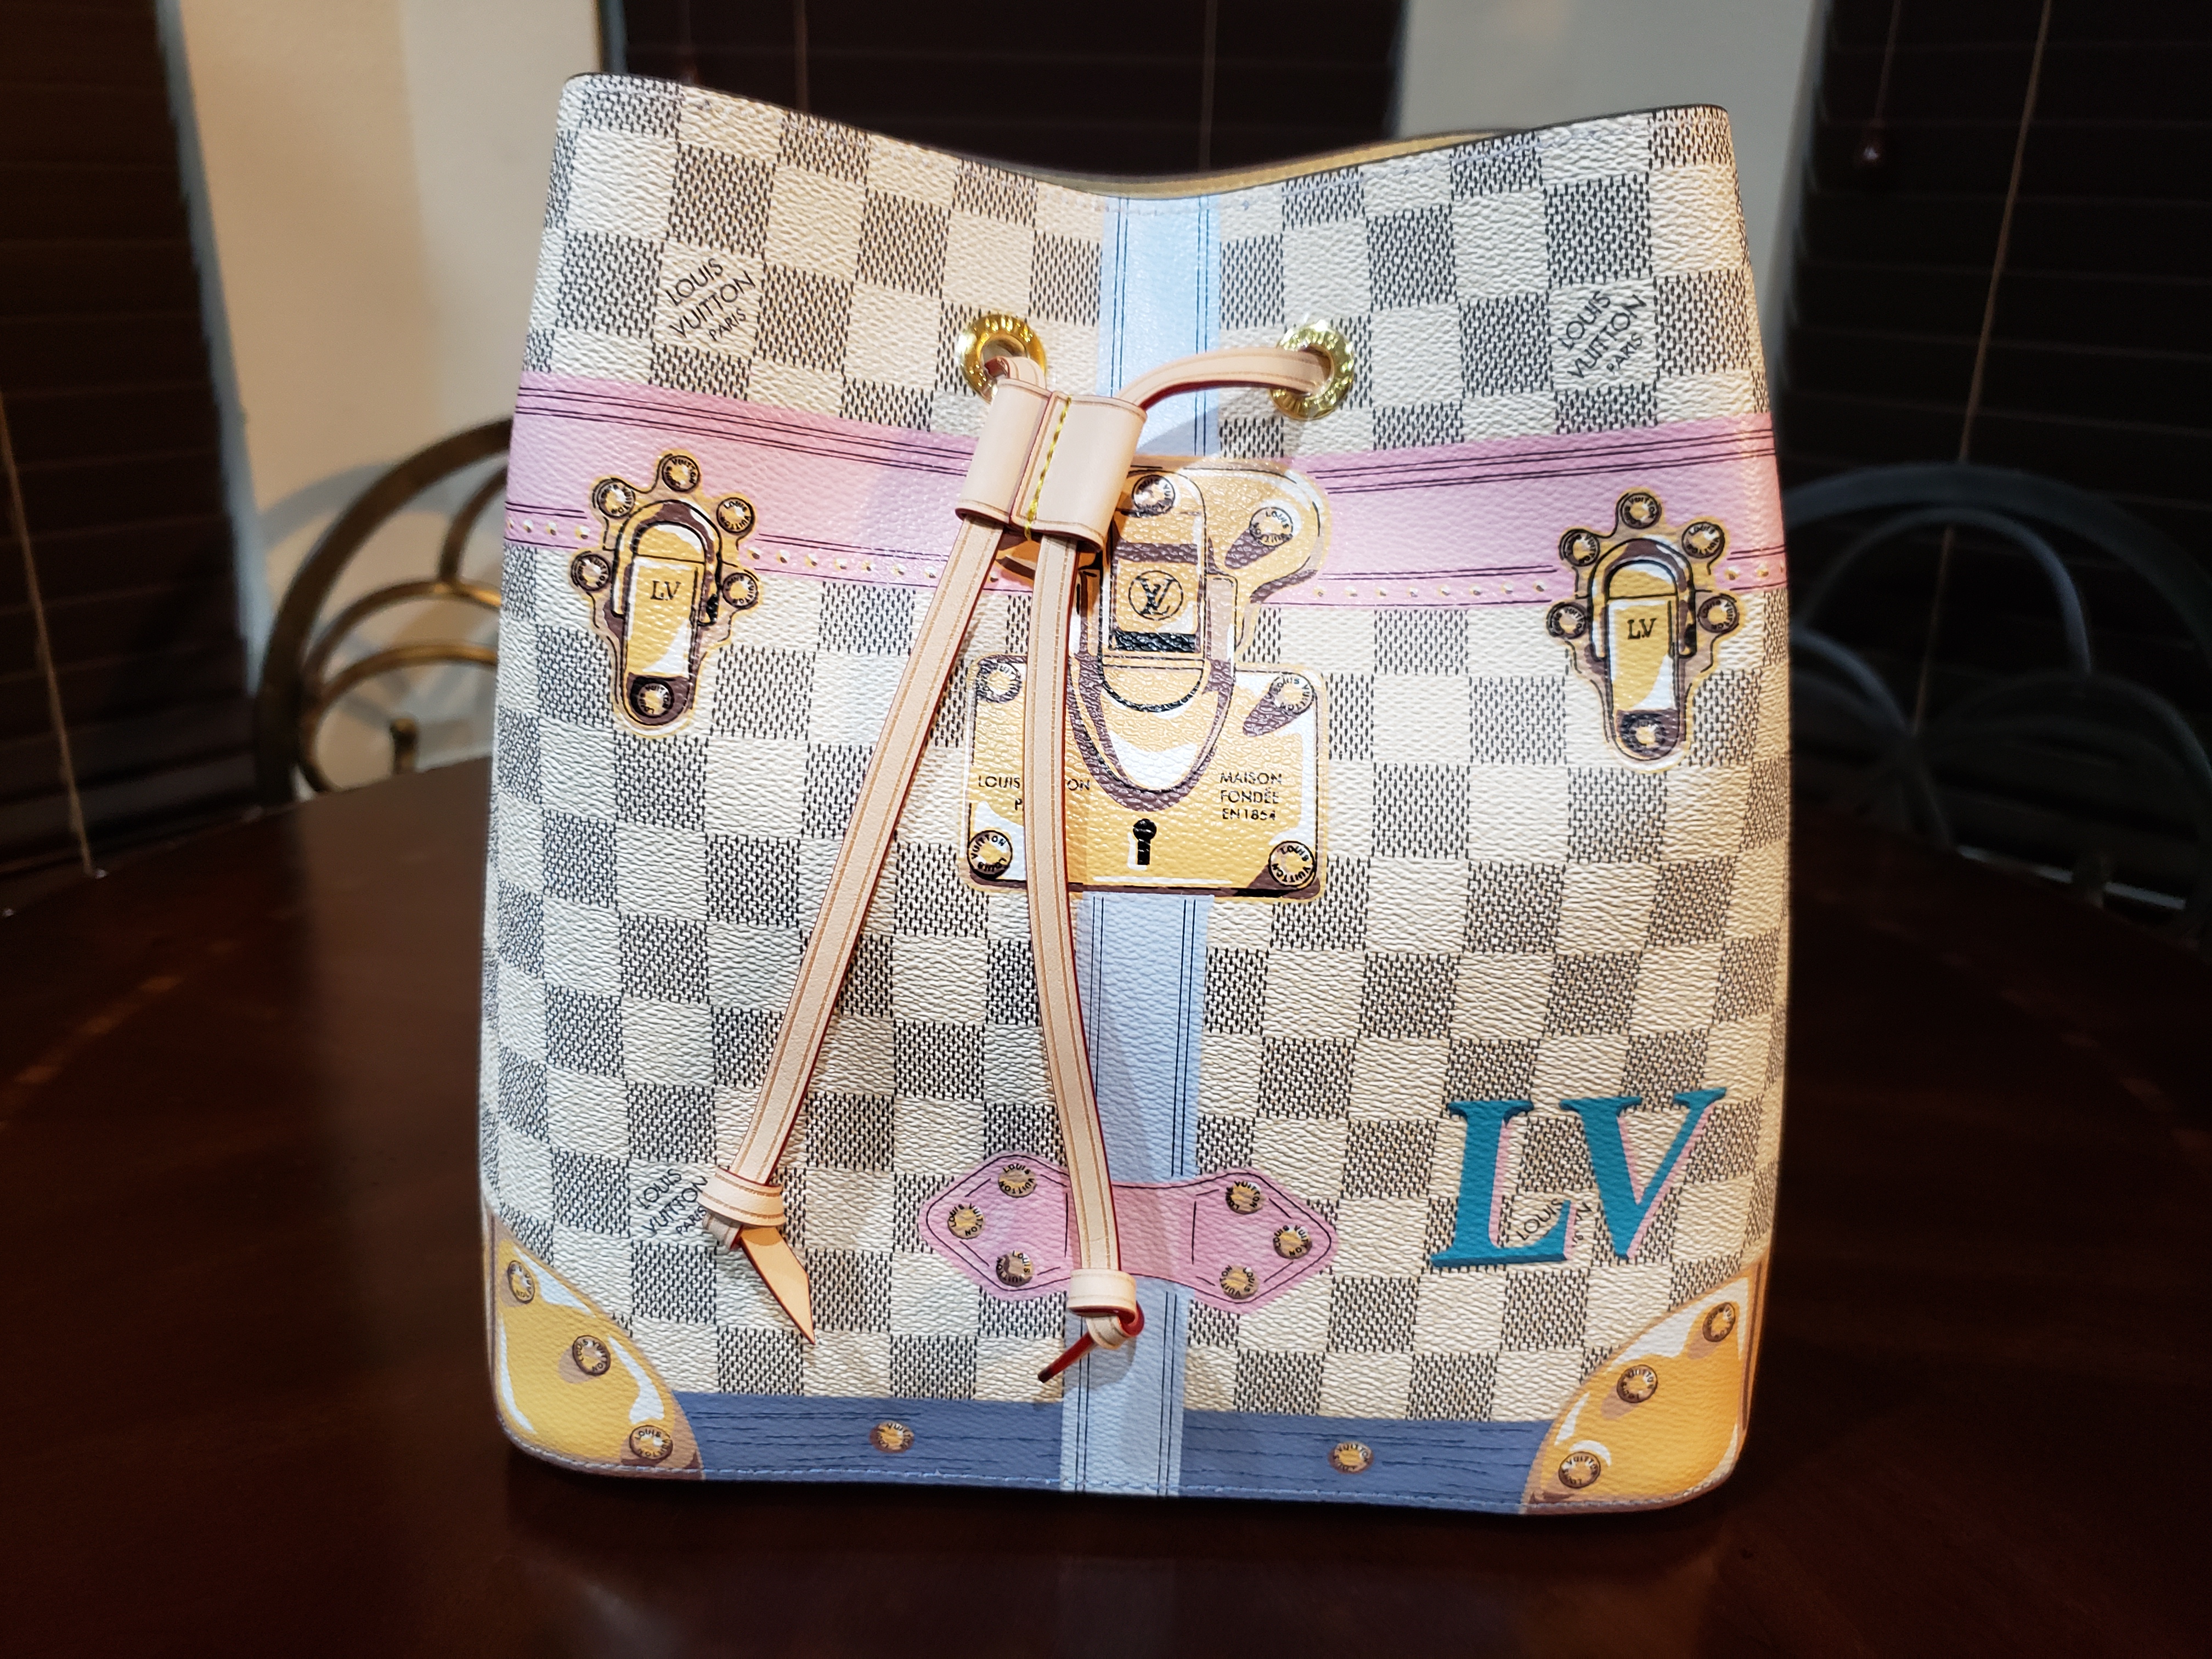 Which Seller Should I Go for Louis Vuitton Replica? (Full Review on Horizon  55) - DreamPurses